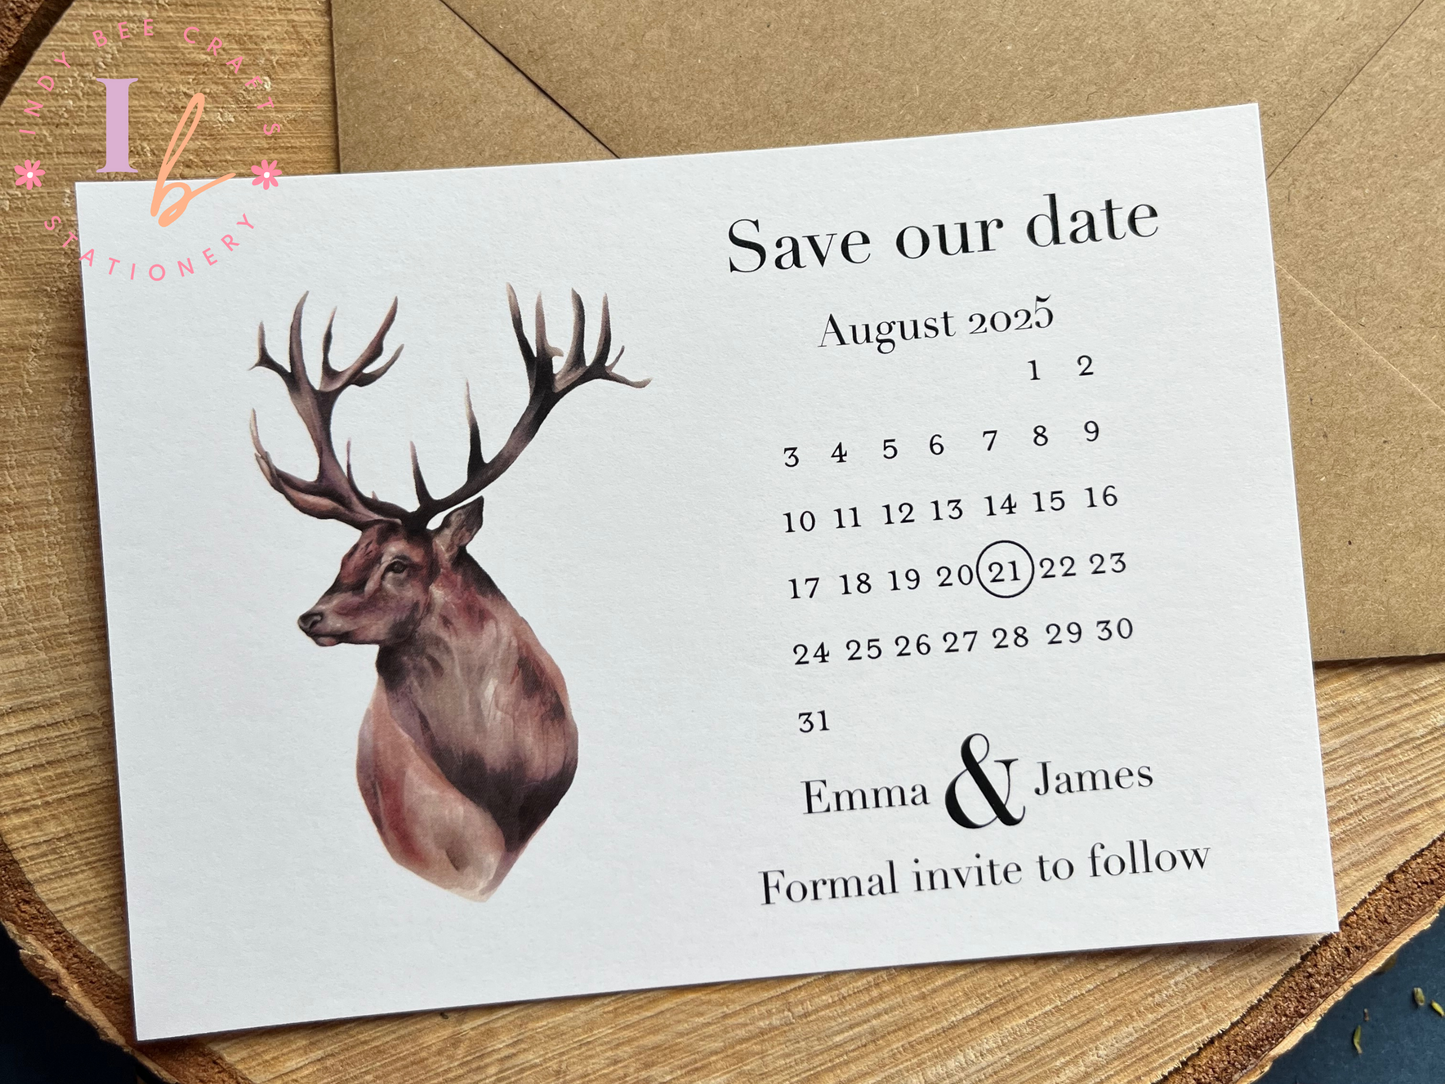 Save the Date Calendar with Rustic Scottish Stag Design